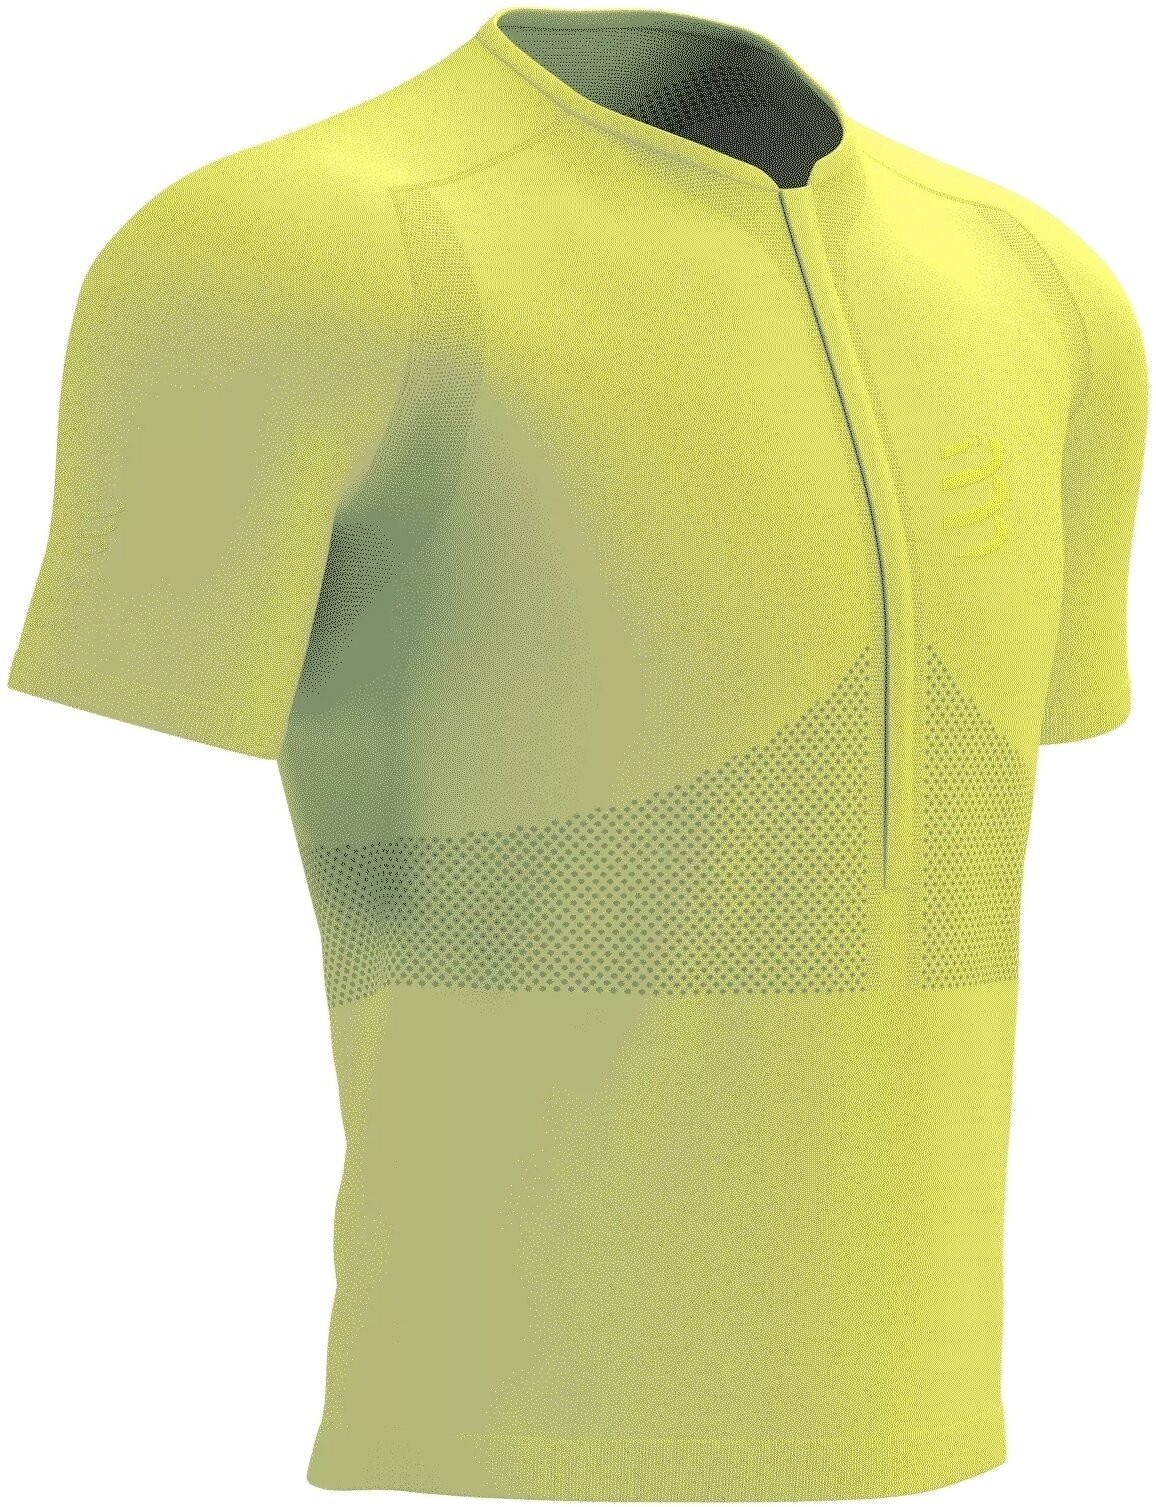 Running t-shirt with short sleeves
 Compressport Trail Half-Zip Fitted SS Top Green Sheen/Safety Yellow XL Running t-shirt with short sleeves